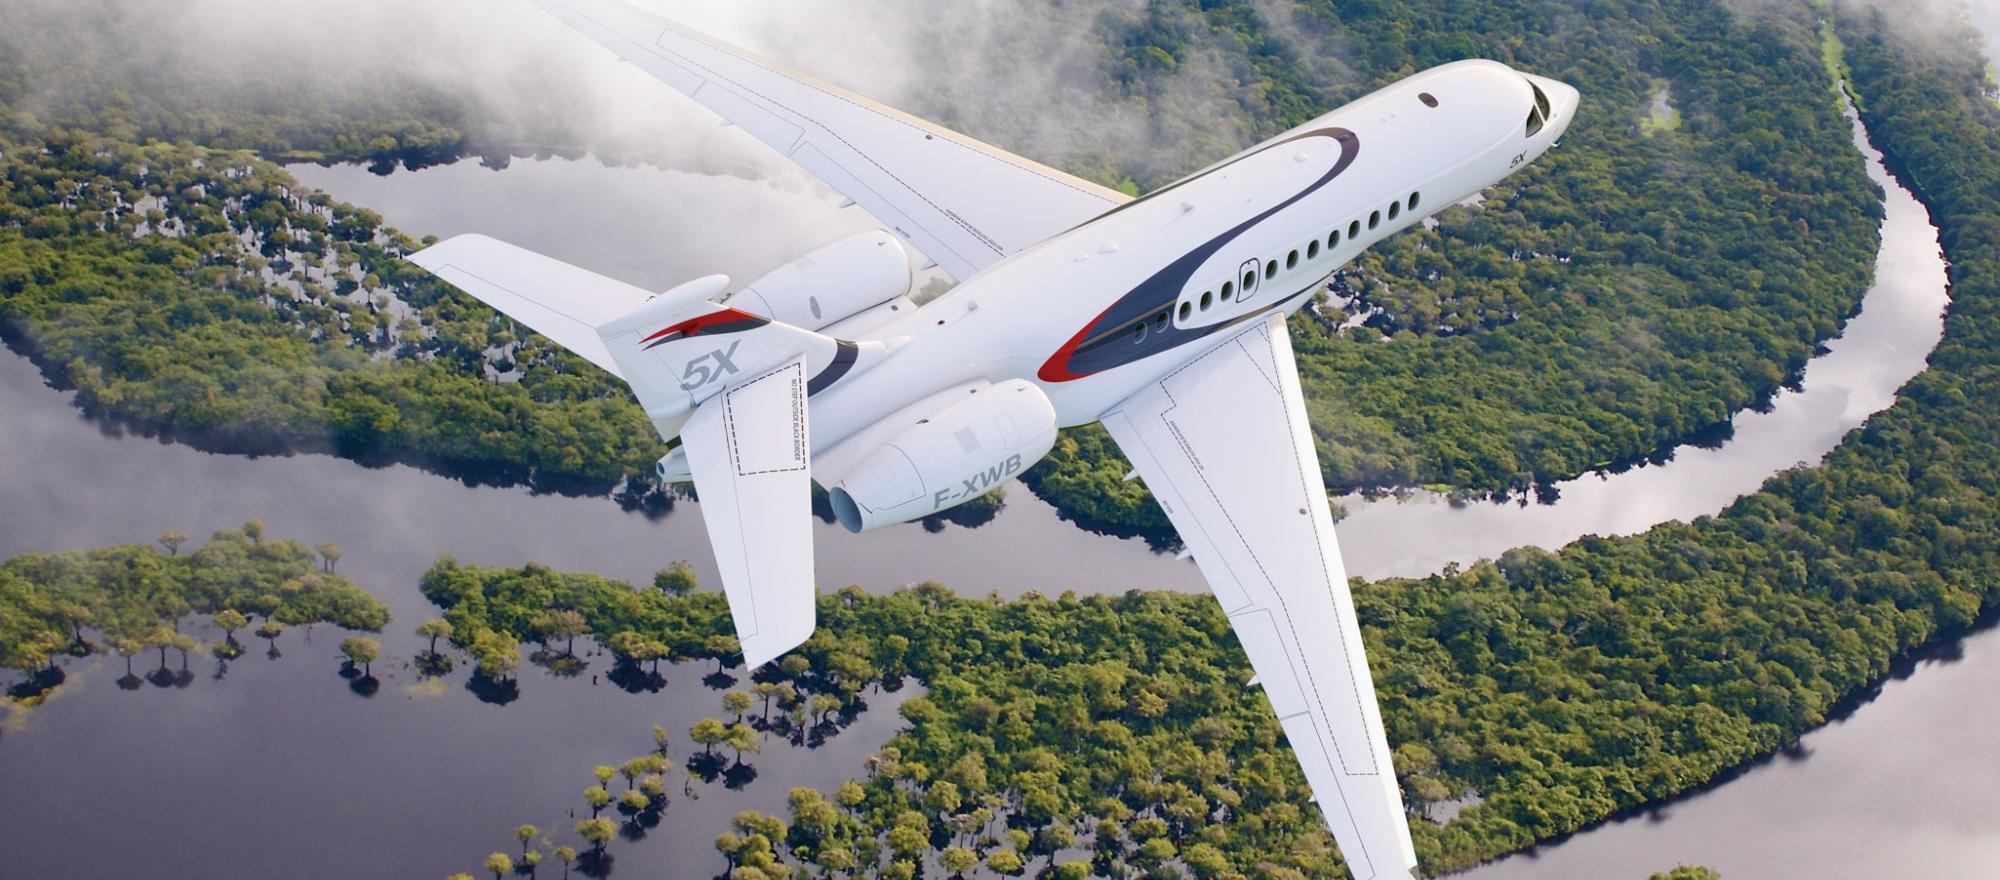 Dassault revealed the $45 million Falcon 5X in late 2013. The first aircraft will fly this year and certification is likely in 2017.